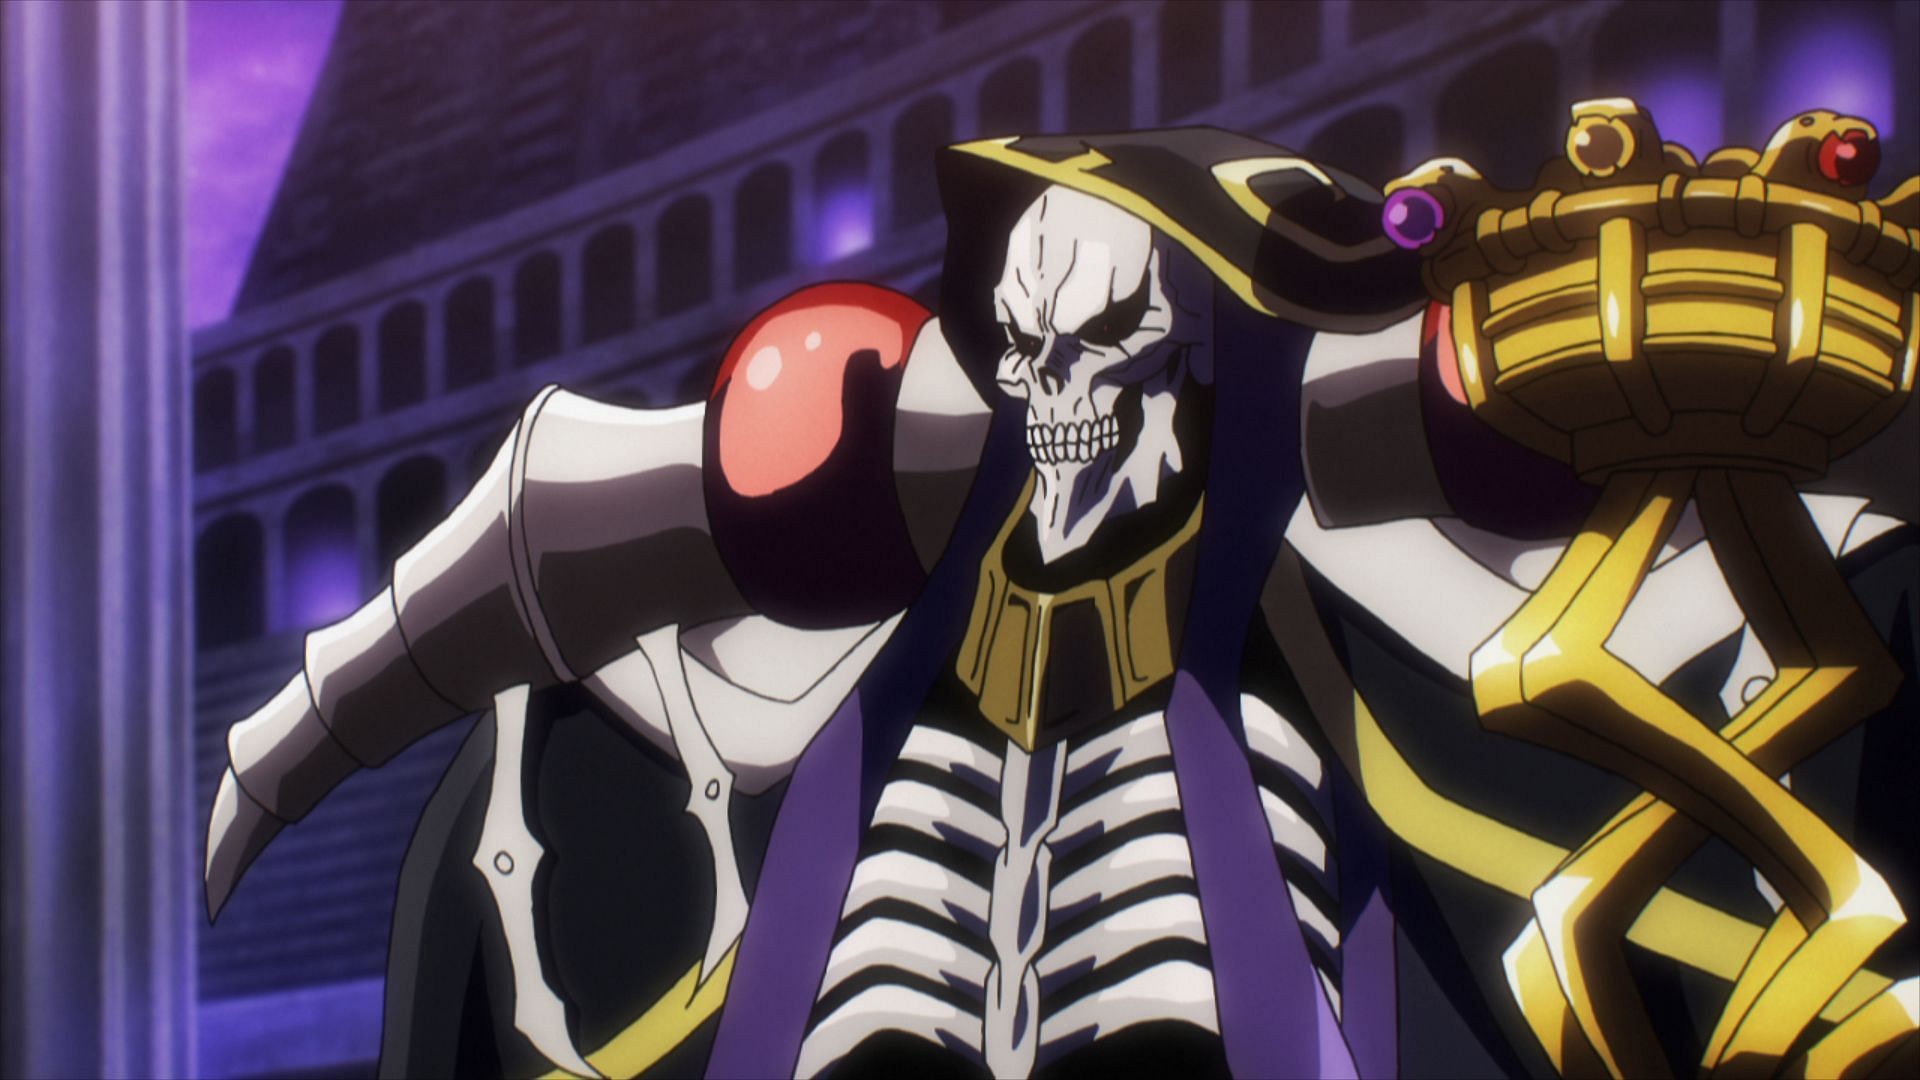 Overlord Anime to Drop Update Next Month